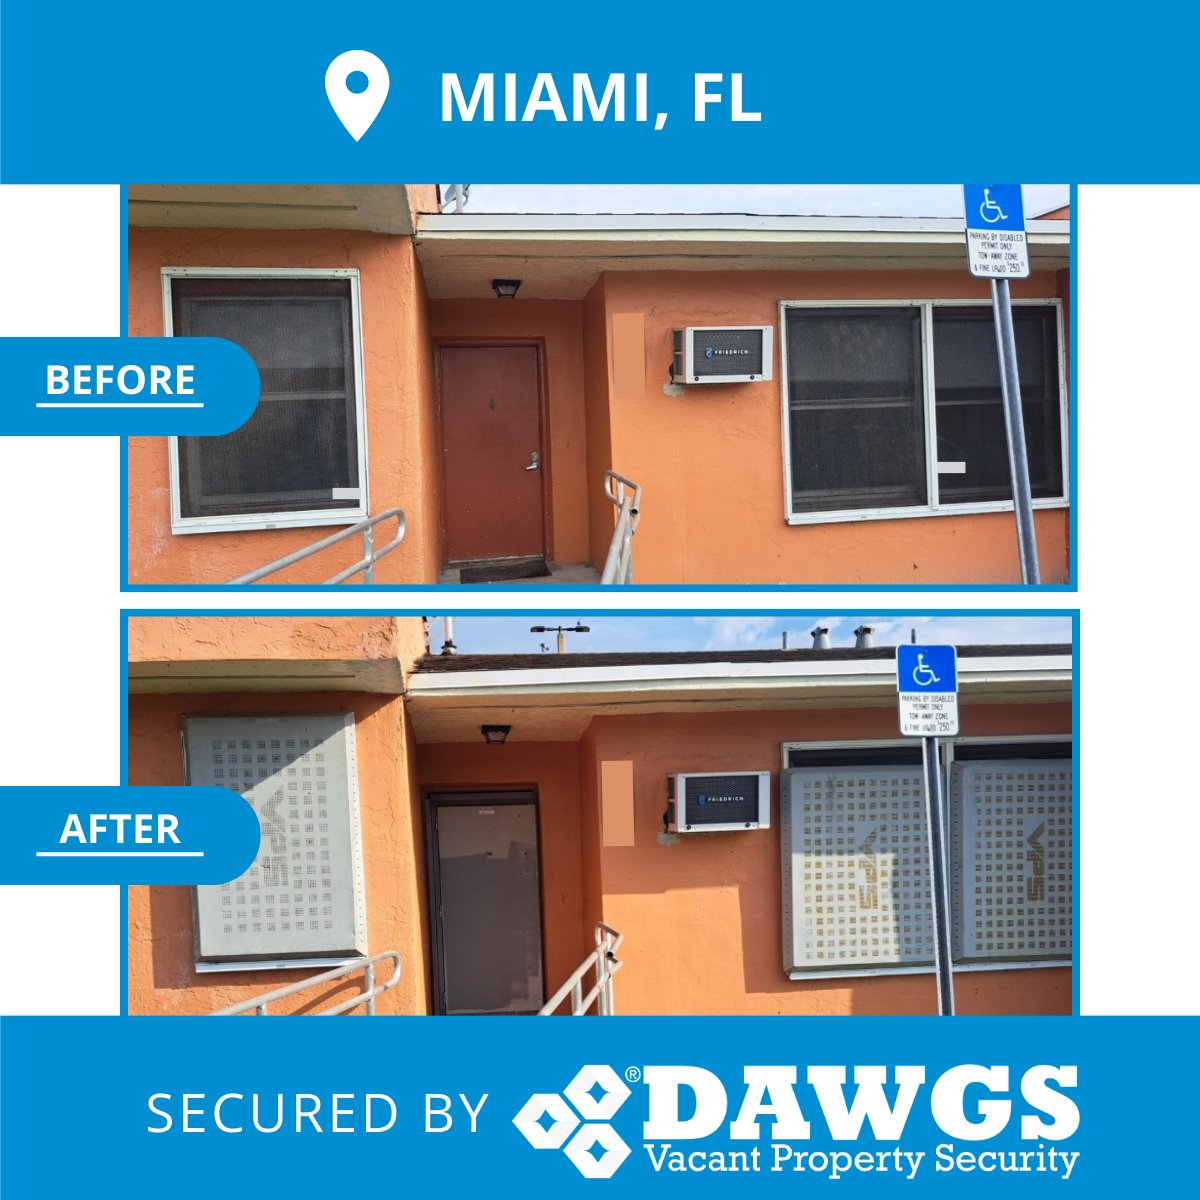 🏢 Safeguard Vacant Properties with DAWGS Guards!

📸 Before & After

Before DAWGS: Vulnerable property faced risks.

After DAWGS: Fortified with steel guards for peace of mind.

🏖️ Miami now boasts safer properties. #PropertySecurity